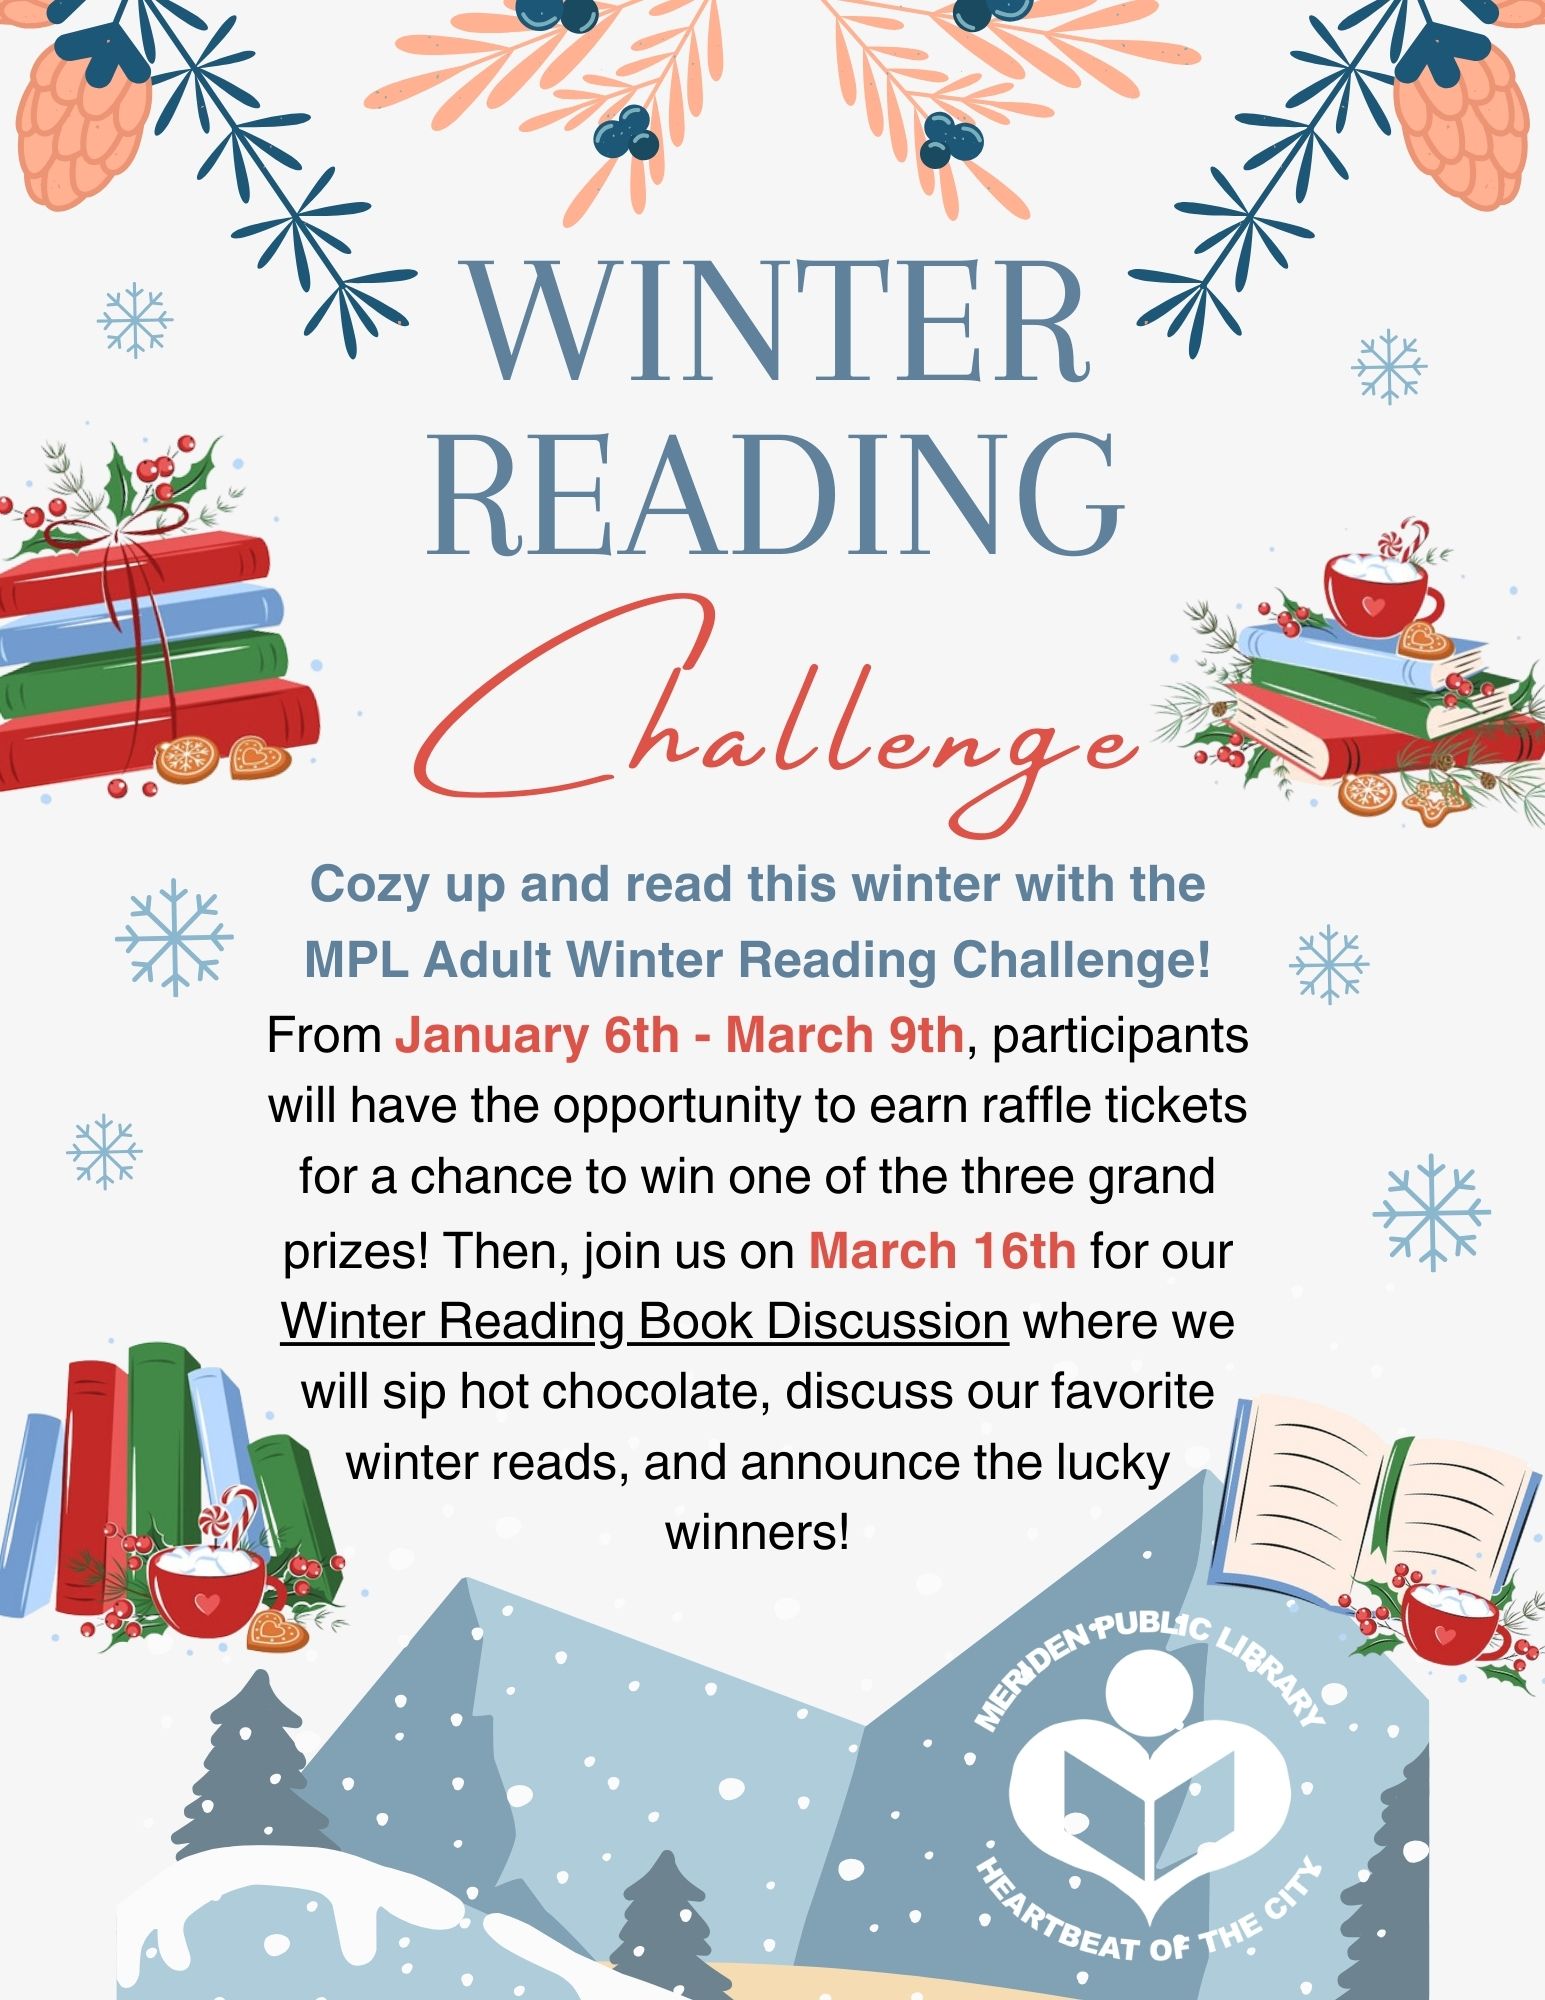 Winter reading challenge flyer with cartoon books, candy canes, hot chocolate and the MPL logo